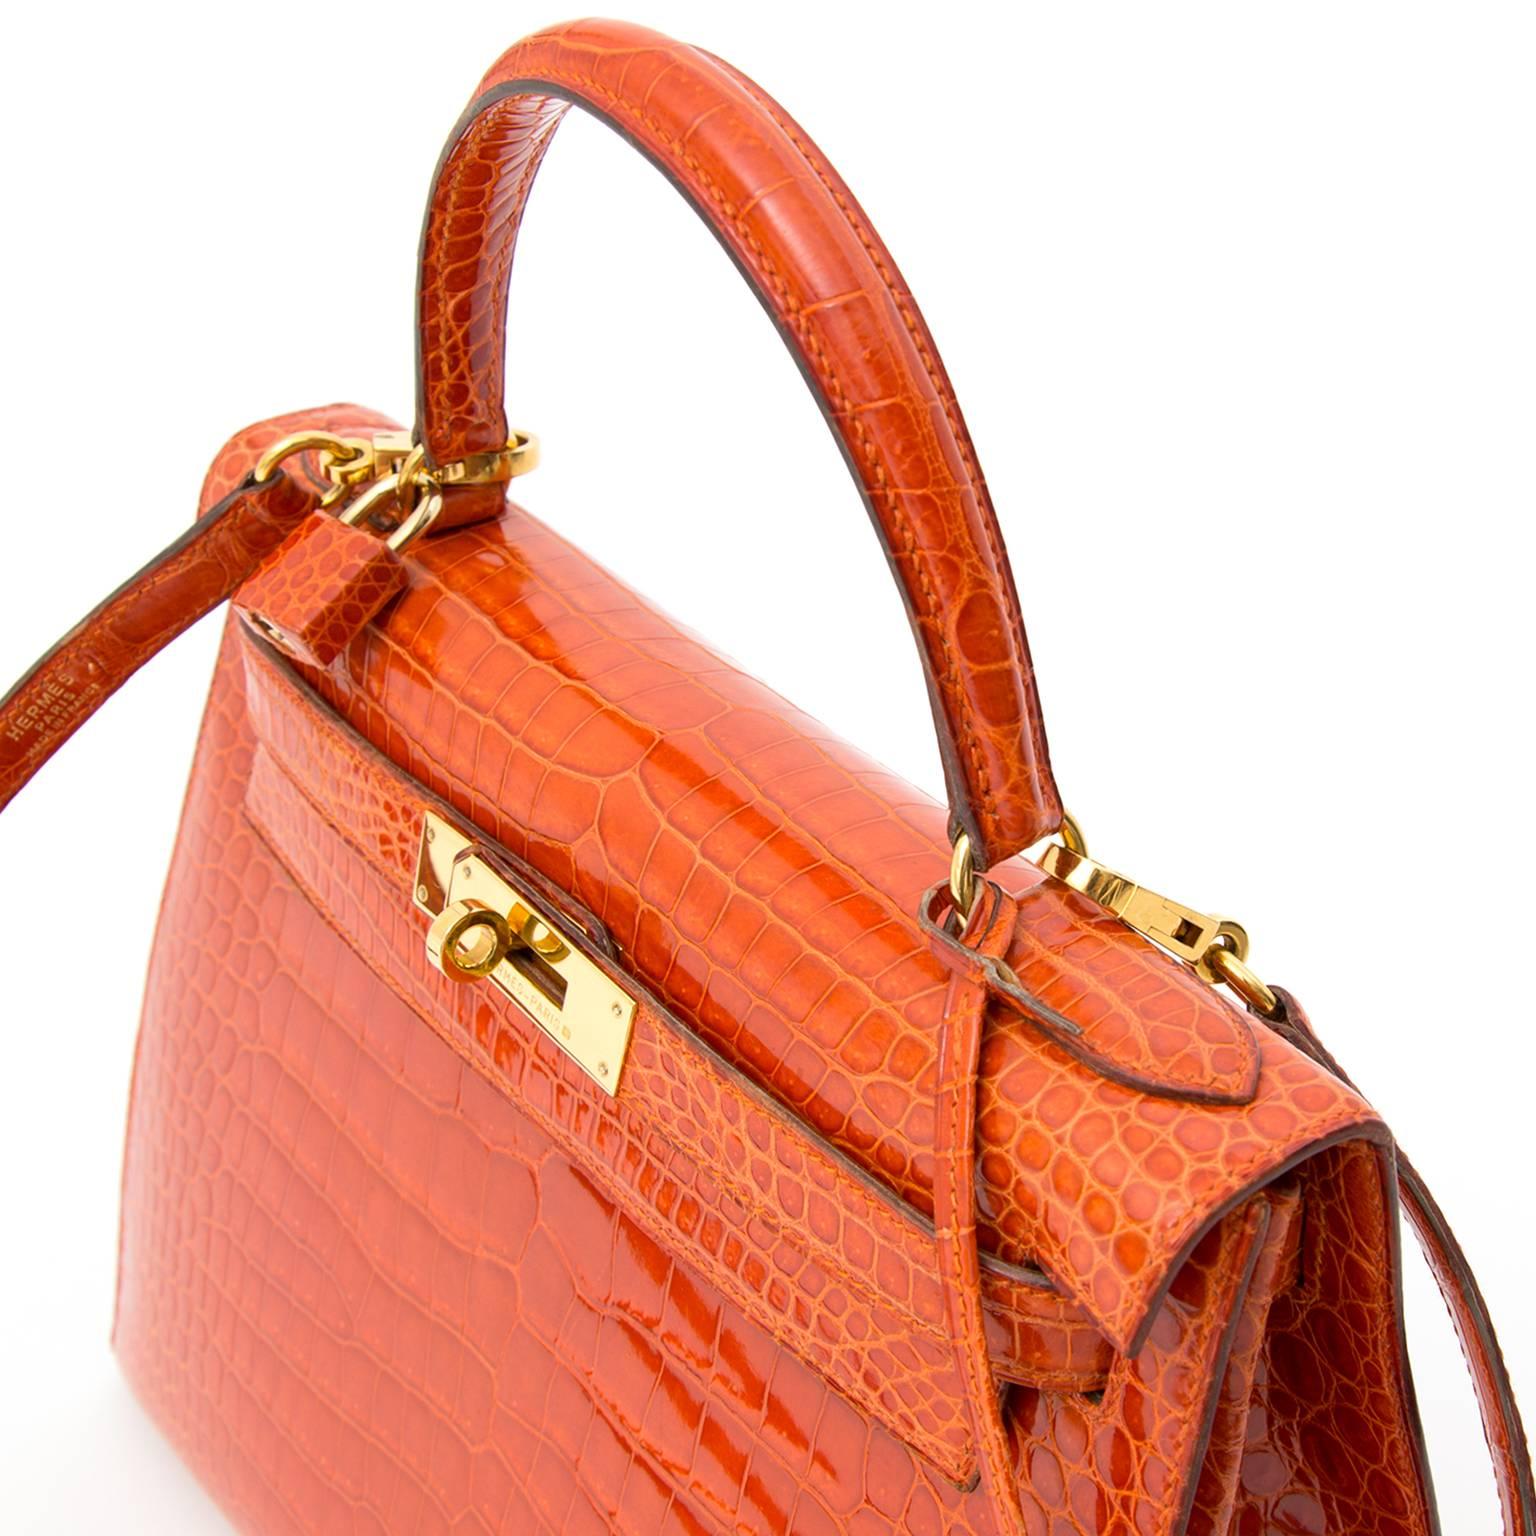 Unseen beauty! This Hermès Kelly bag in precious crocodile Porosus is dyed in one of Hermès' most stunning colors, 'Rouge Agathe'. 
It is a deep burnt orange hue that vibrates through the glossy surface of the Porosus hide and is in perfect